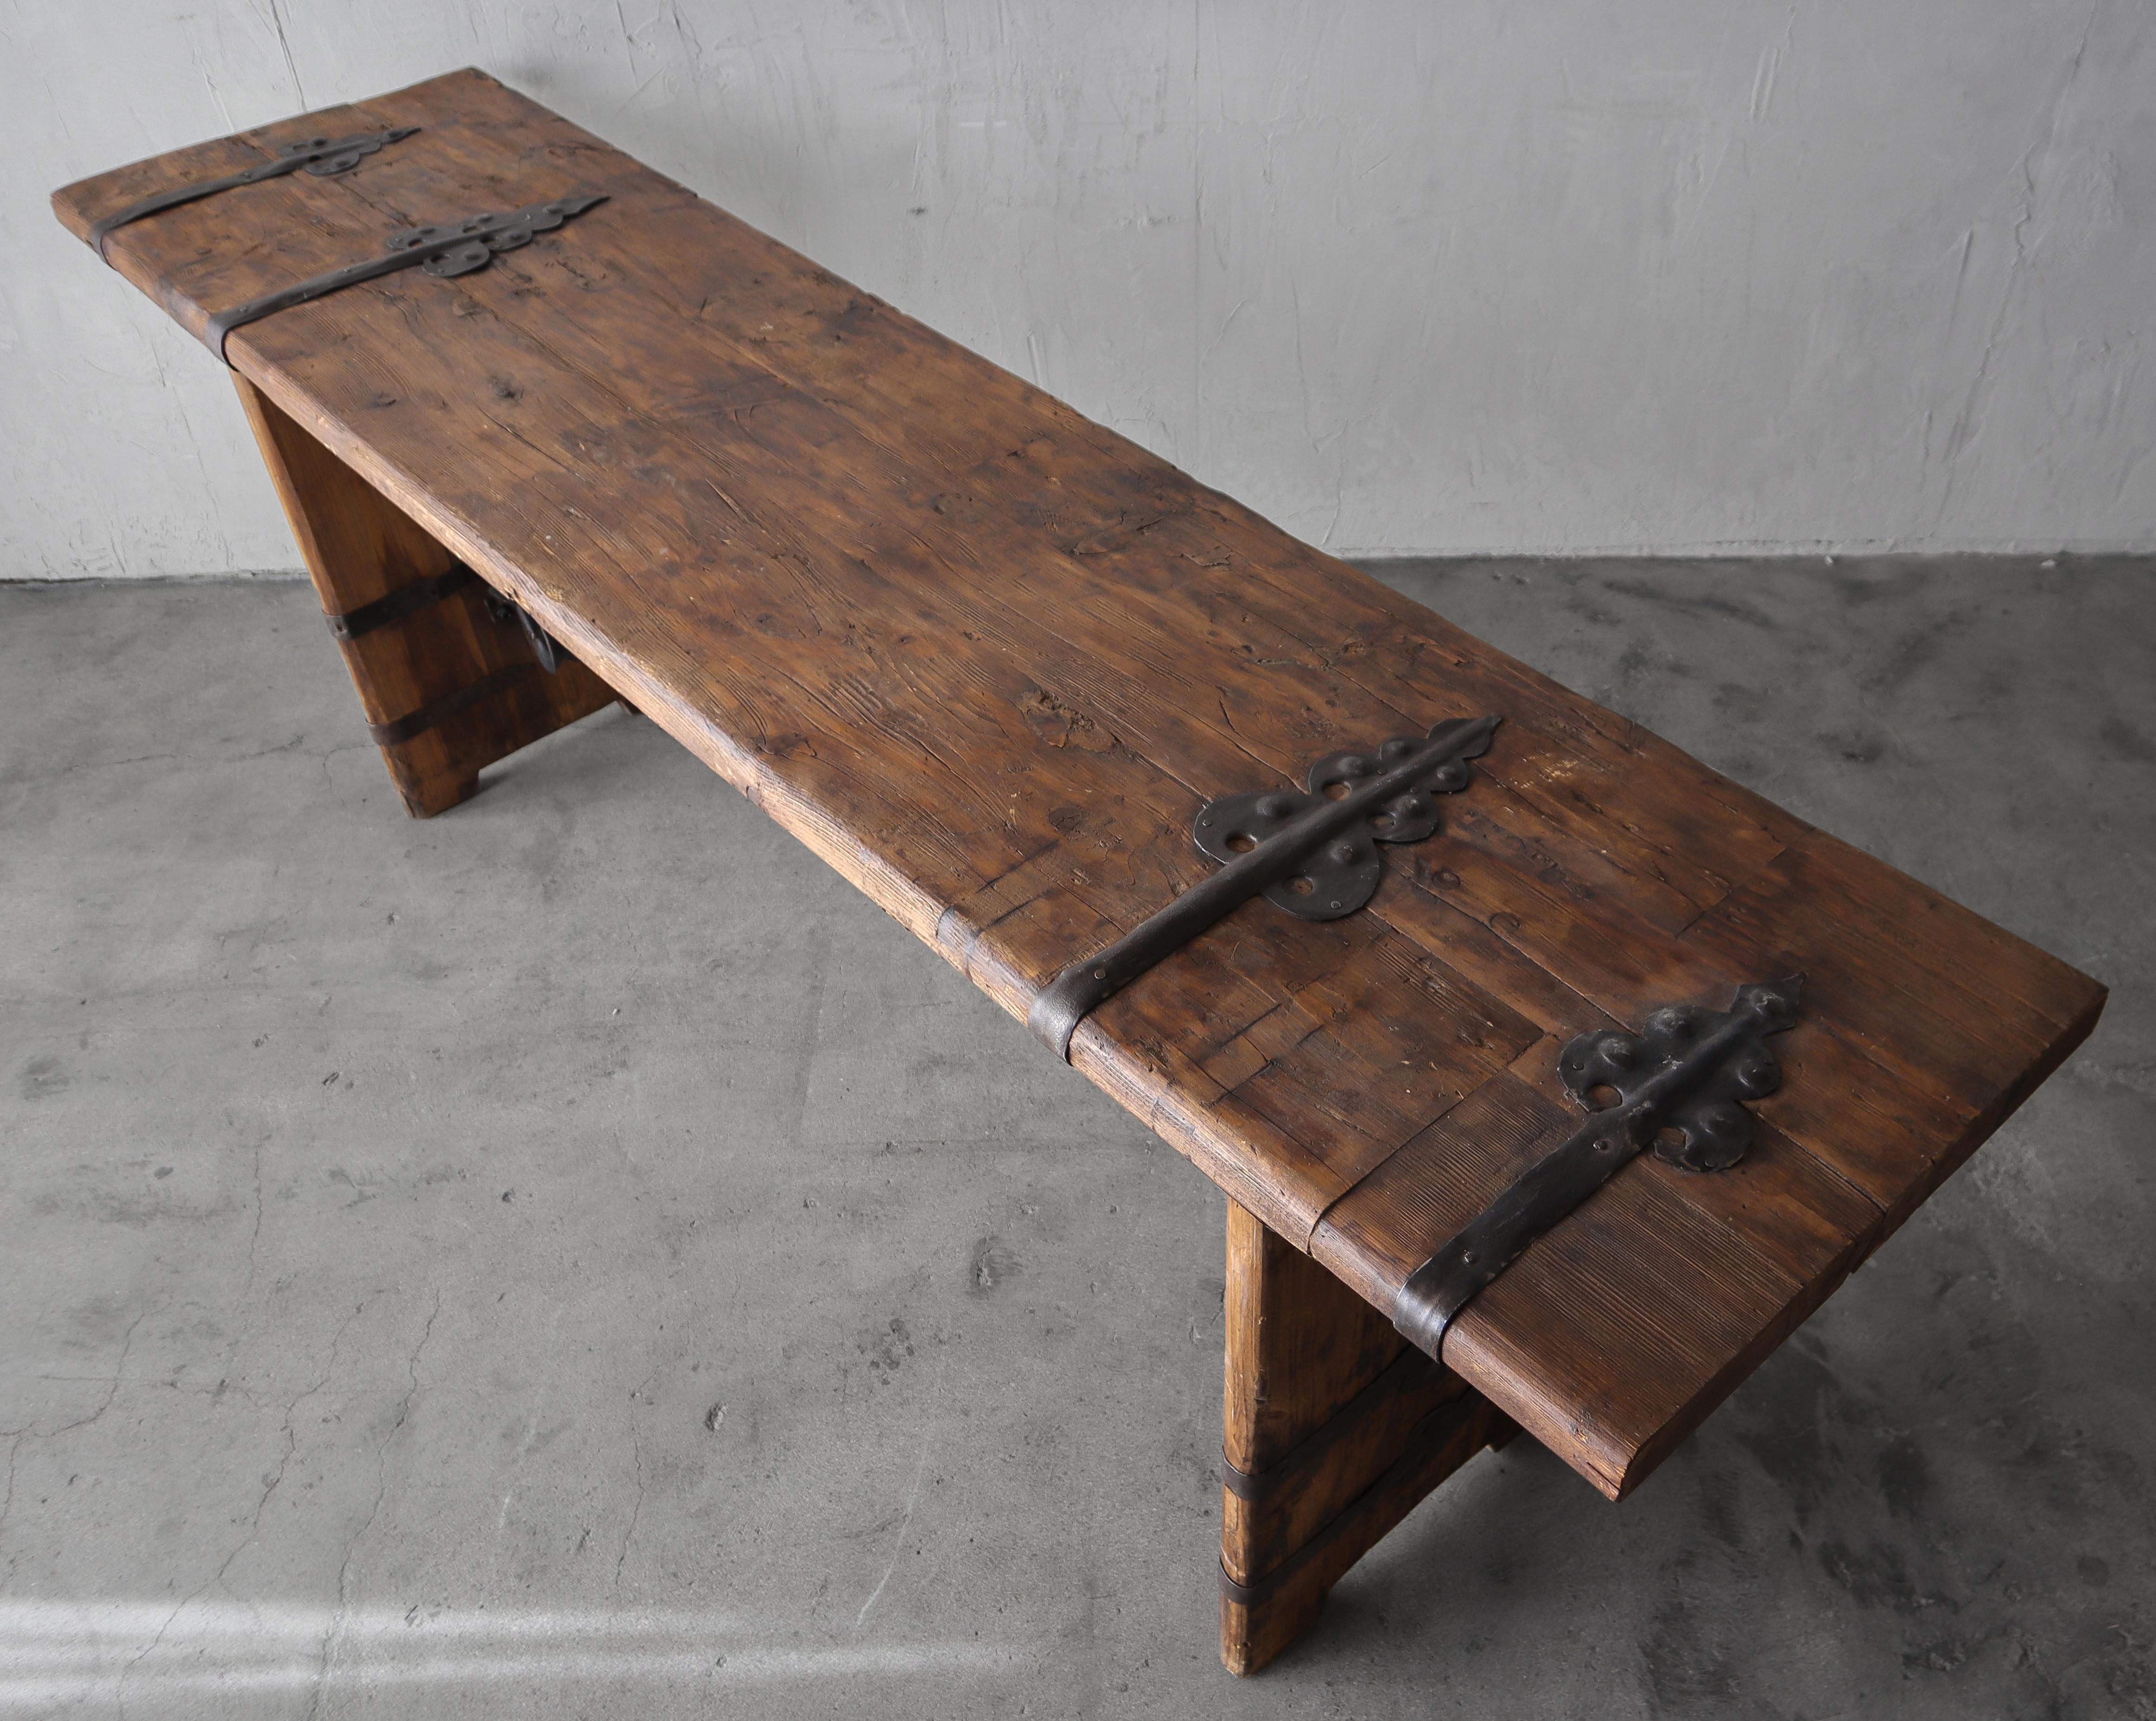 8ft Rustic Reclaimed Wood and Iron Console Table In Good Condition For Sale In Las Vegas, NV